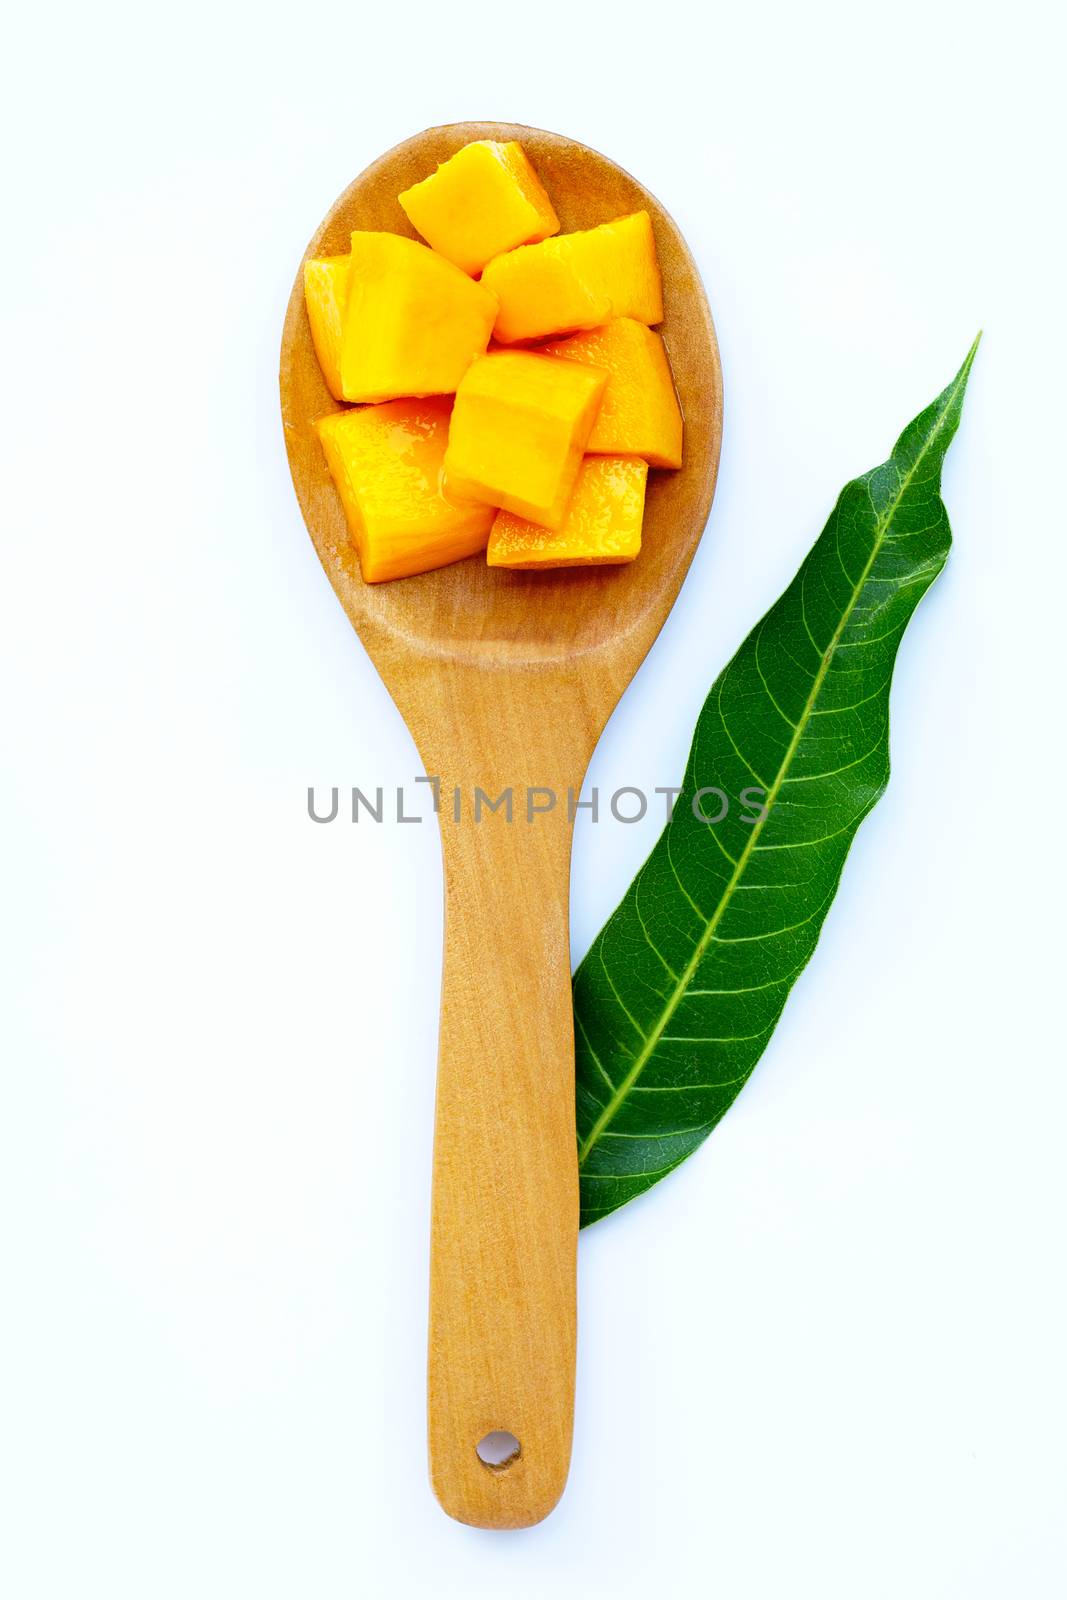 Tropical fruit, Mango on wooden spoon, white background.  by Bowonpat